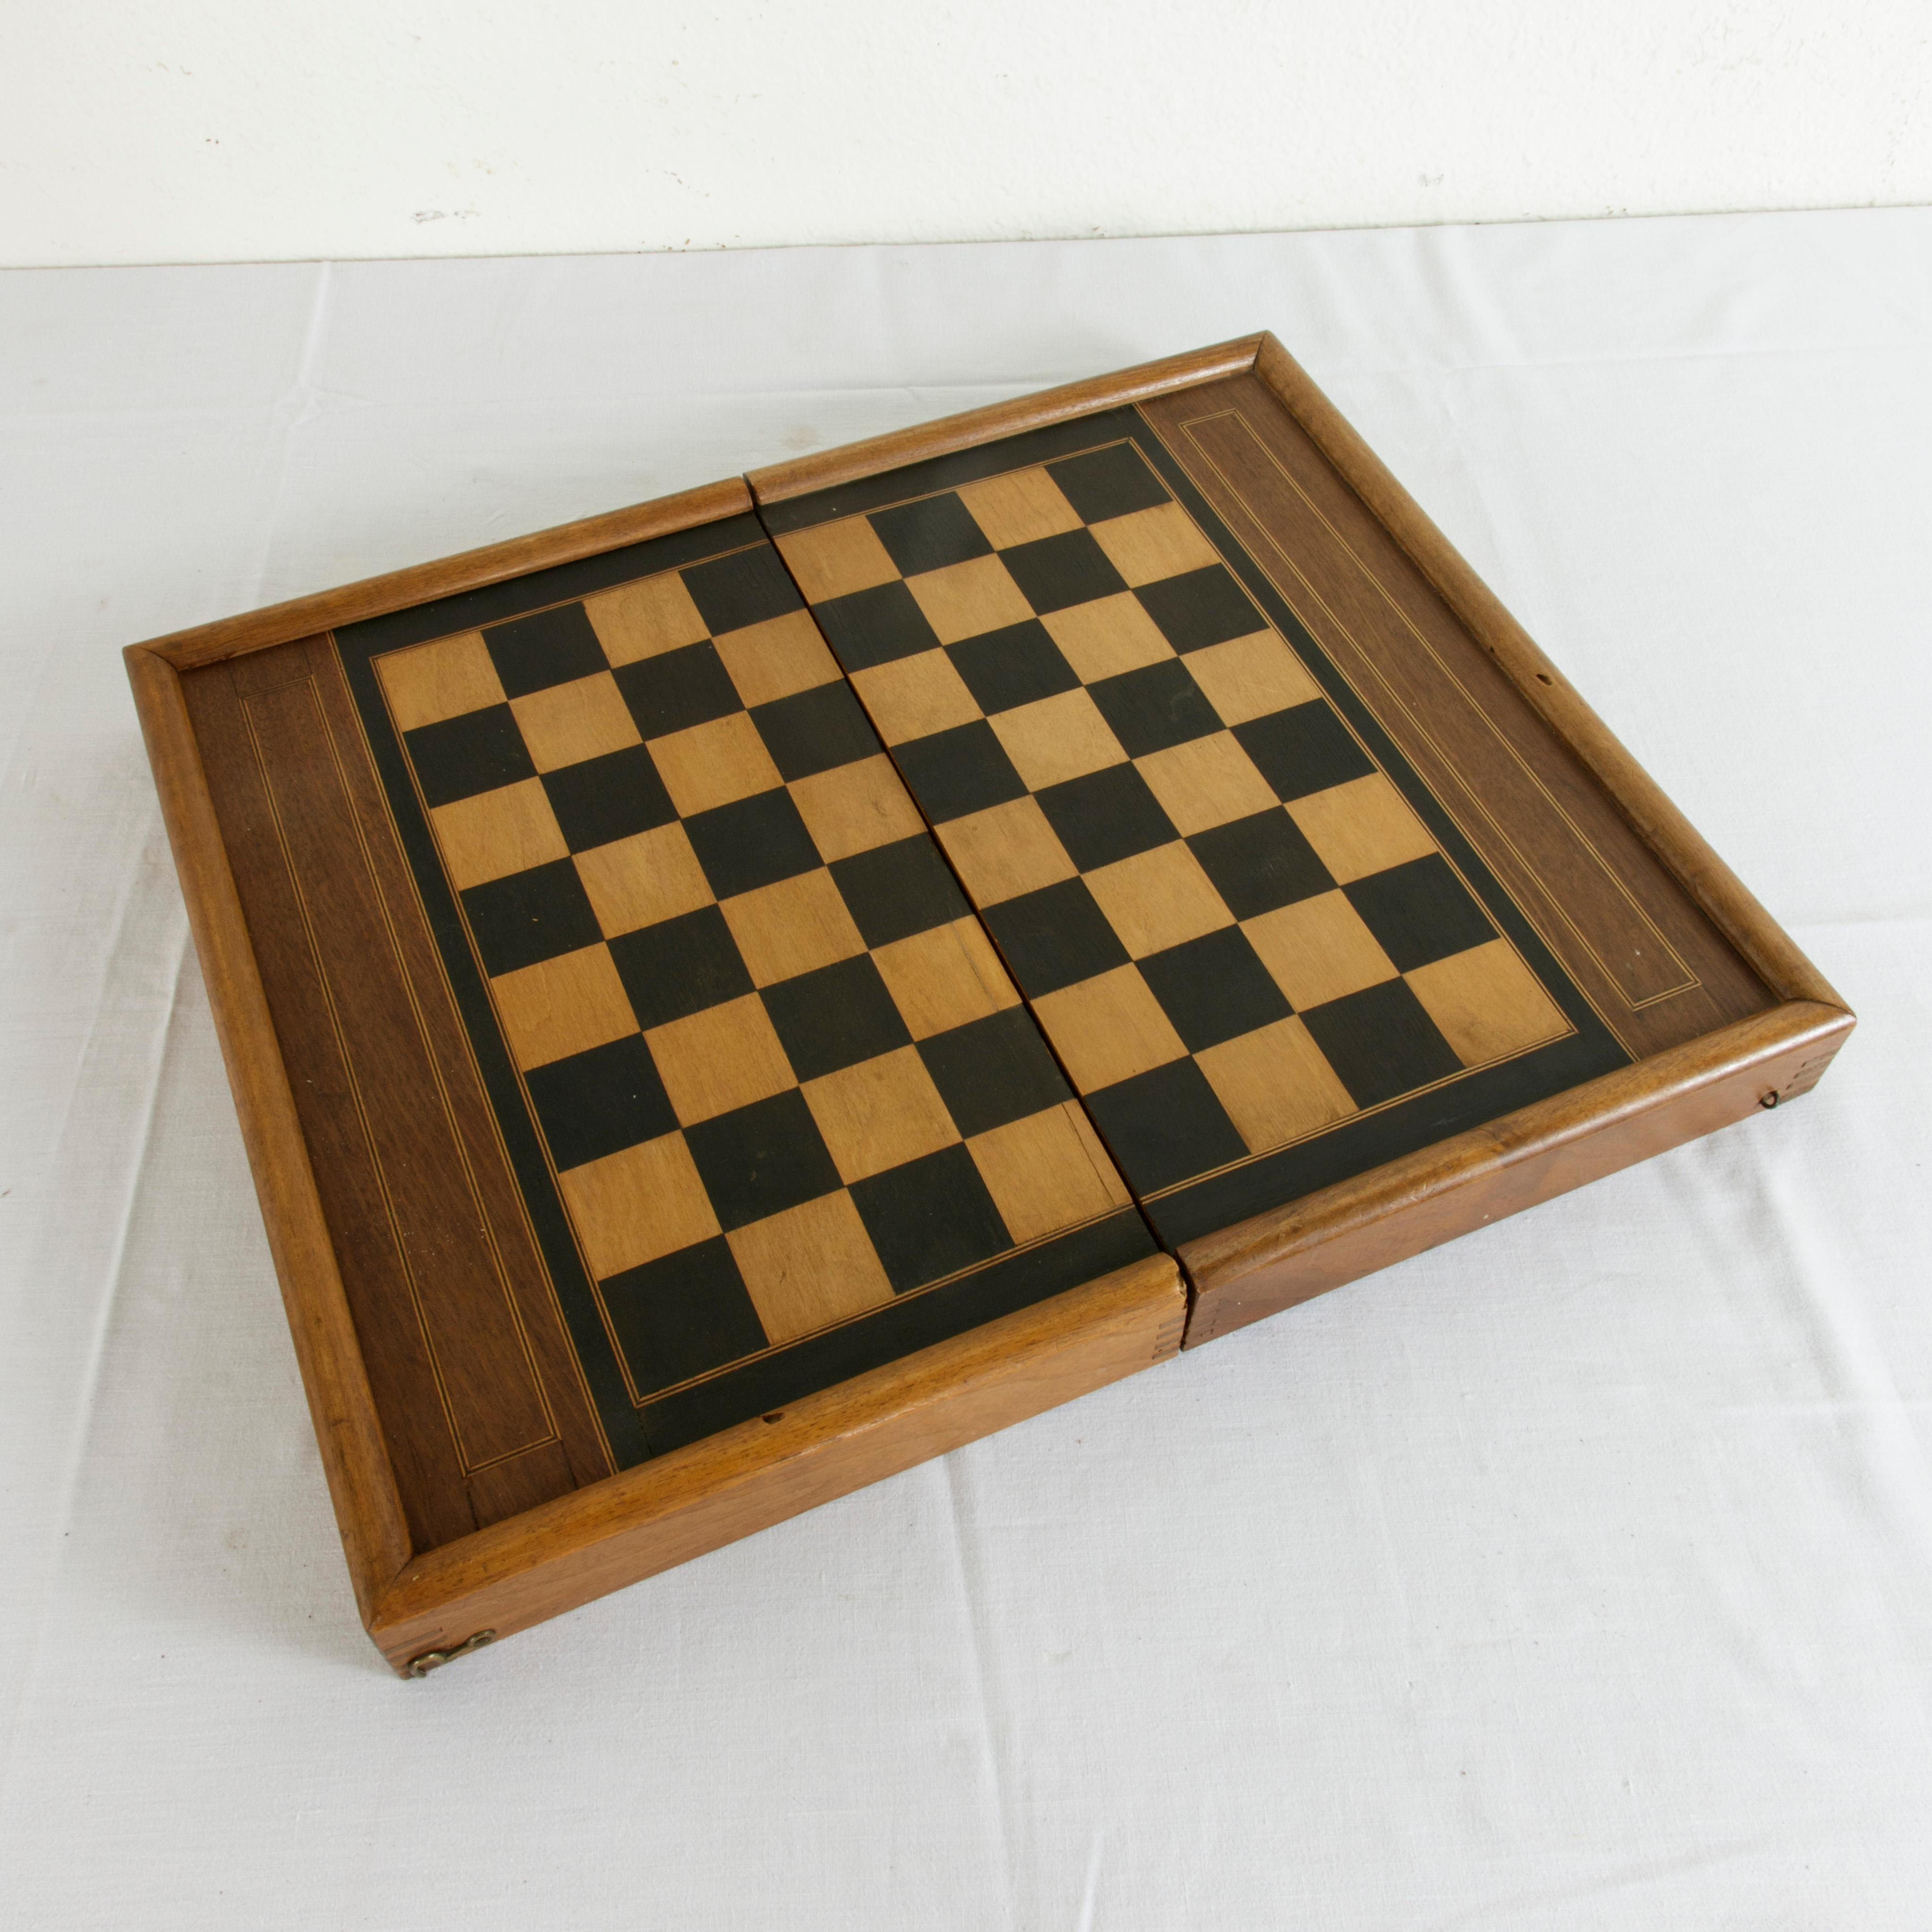 Walnut Marquetry Folding Game Box, with Reverse Side Backgammon, circa 1900 2